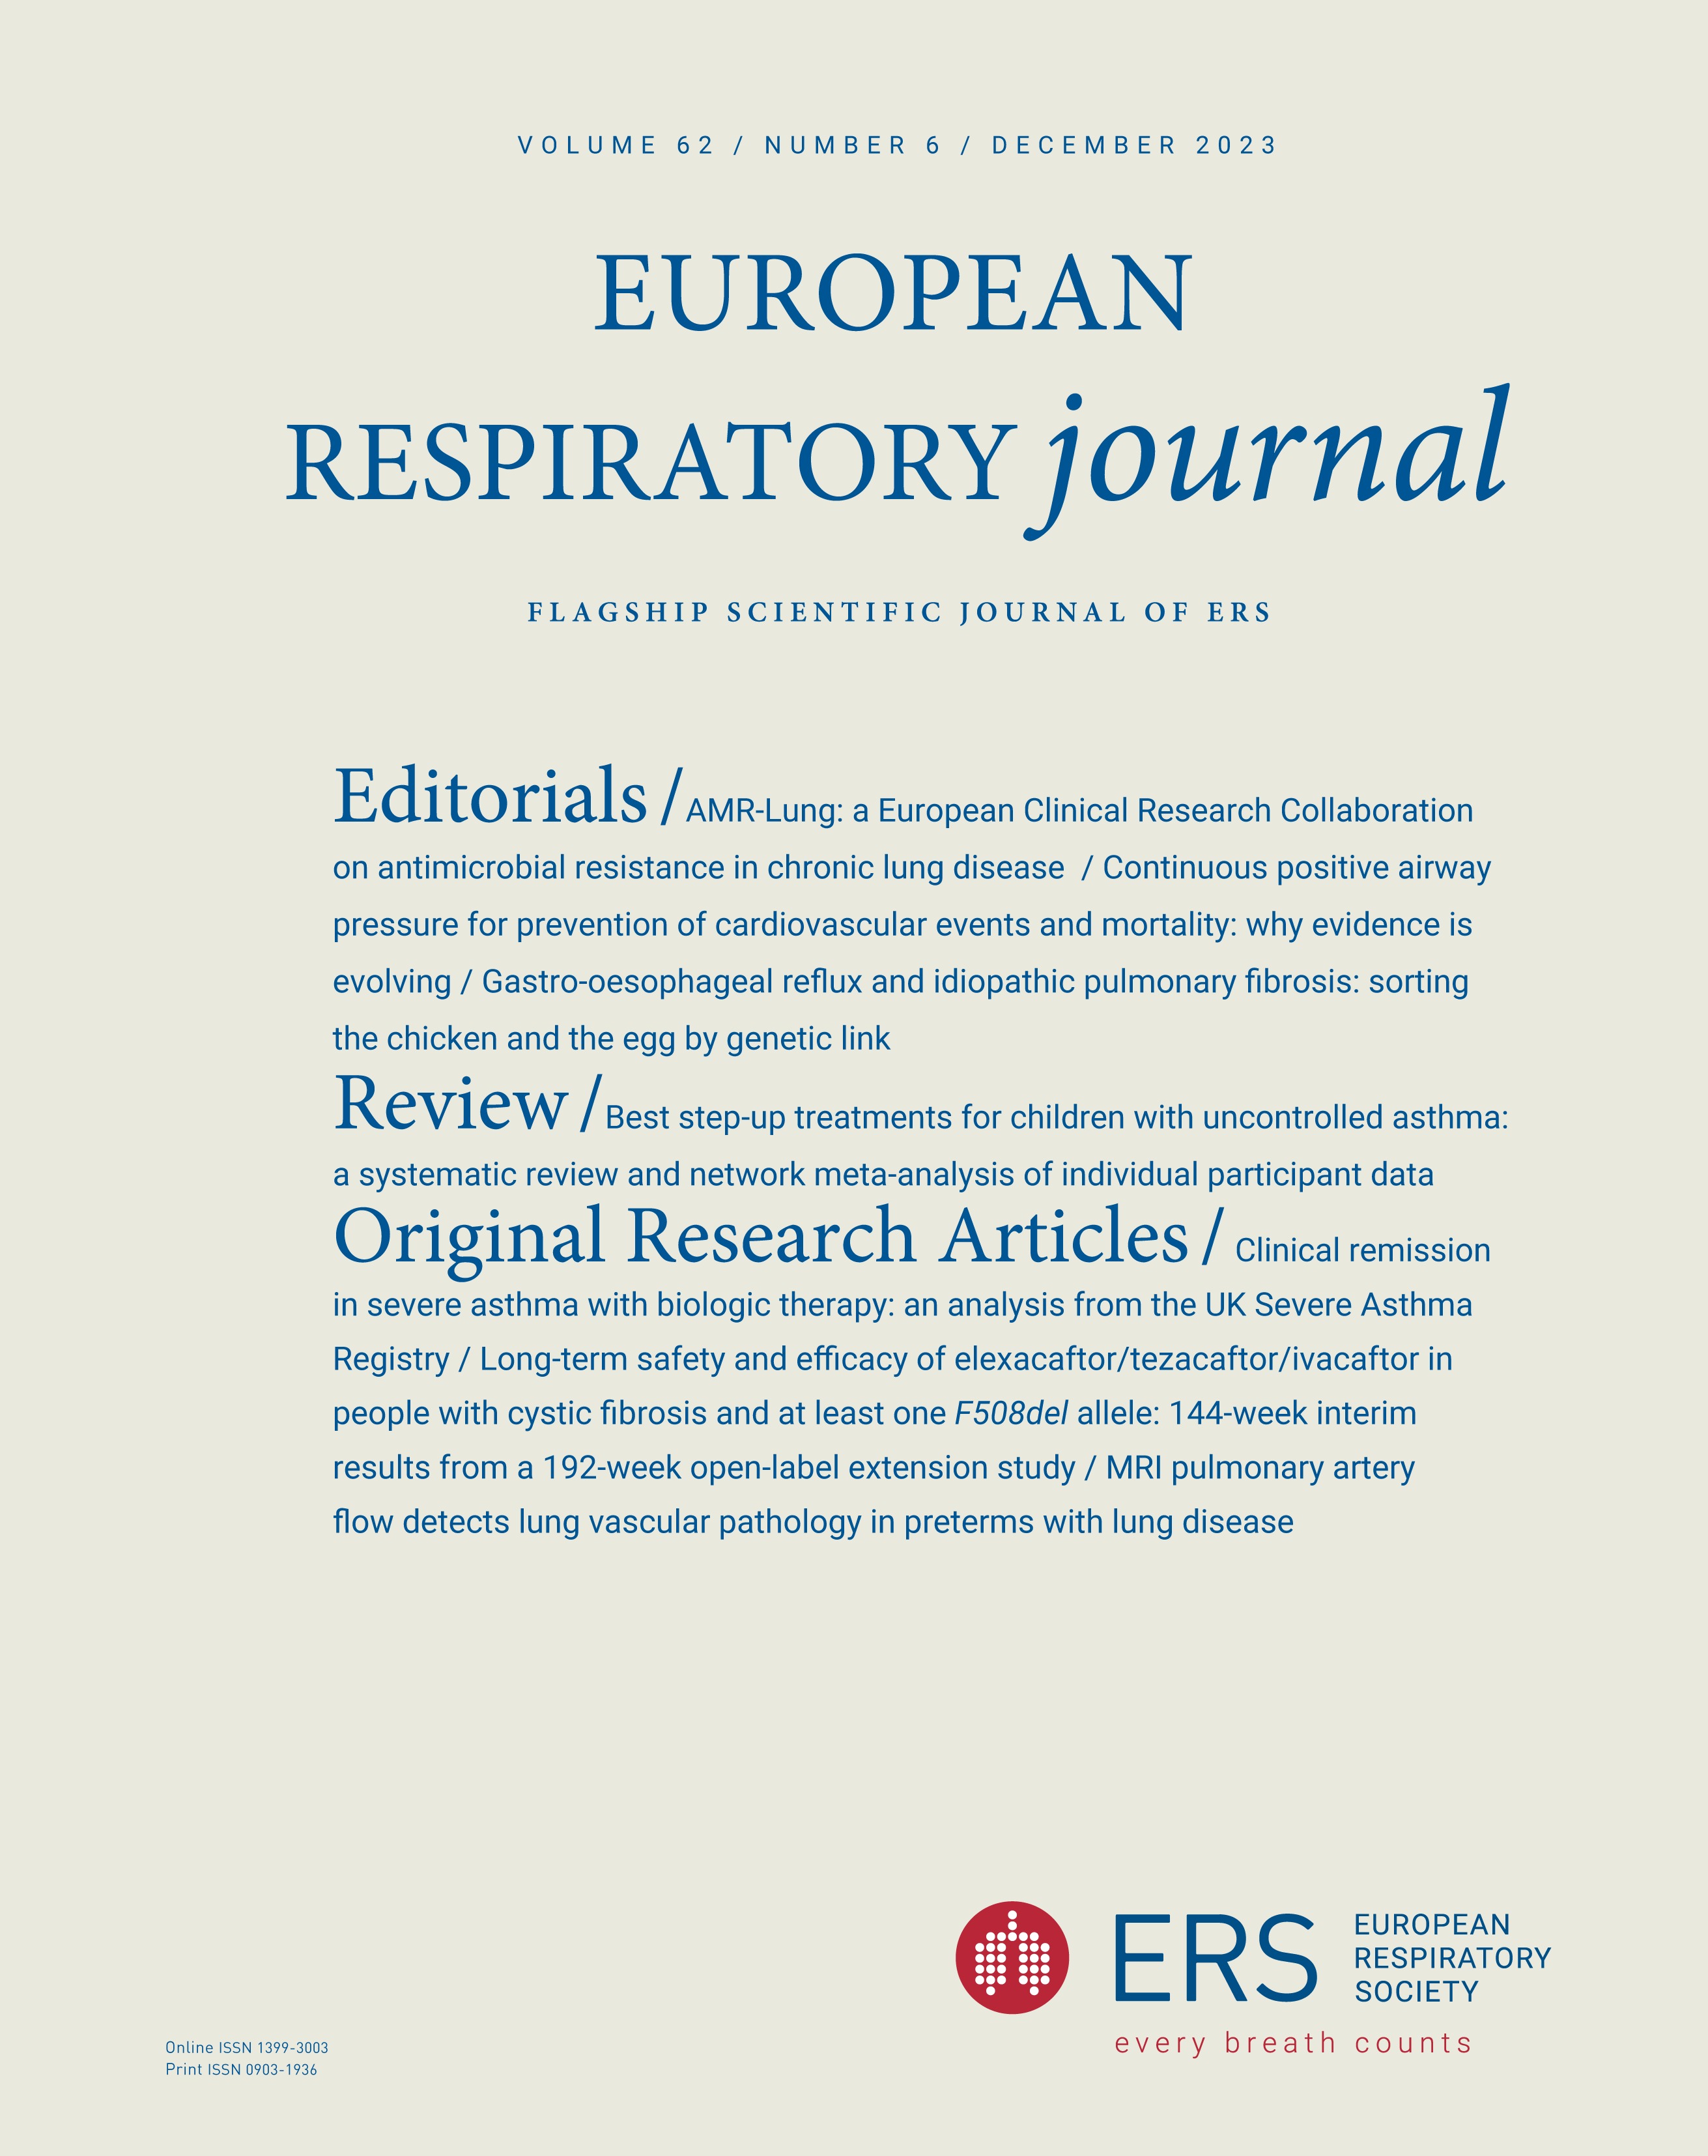 Dyspnoea in acutely ill mechanically ventilated adult patients: an ERS/ESICM statement